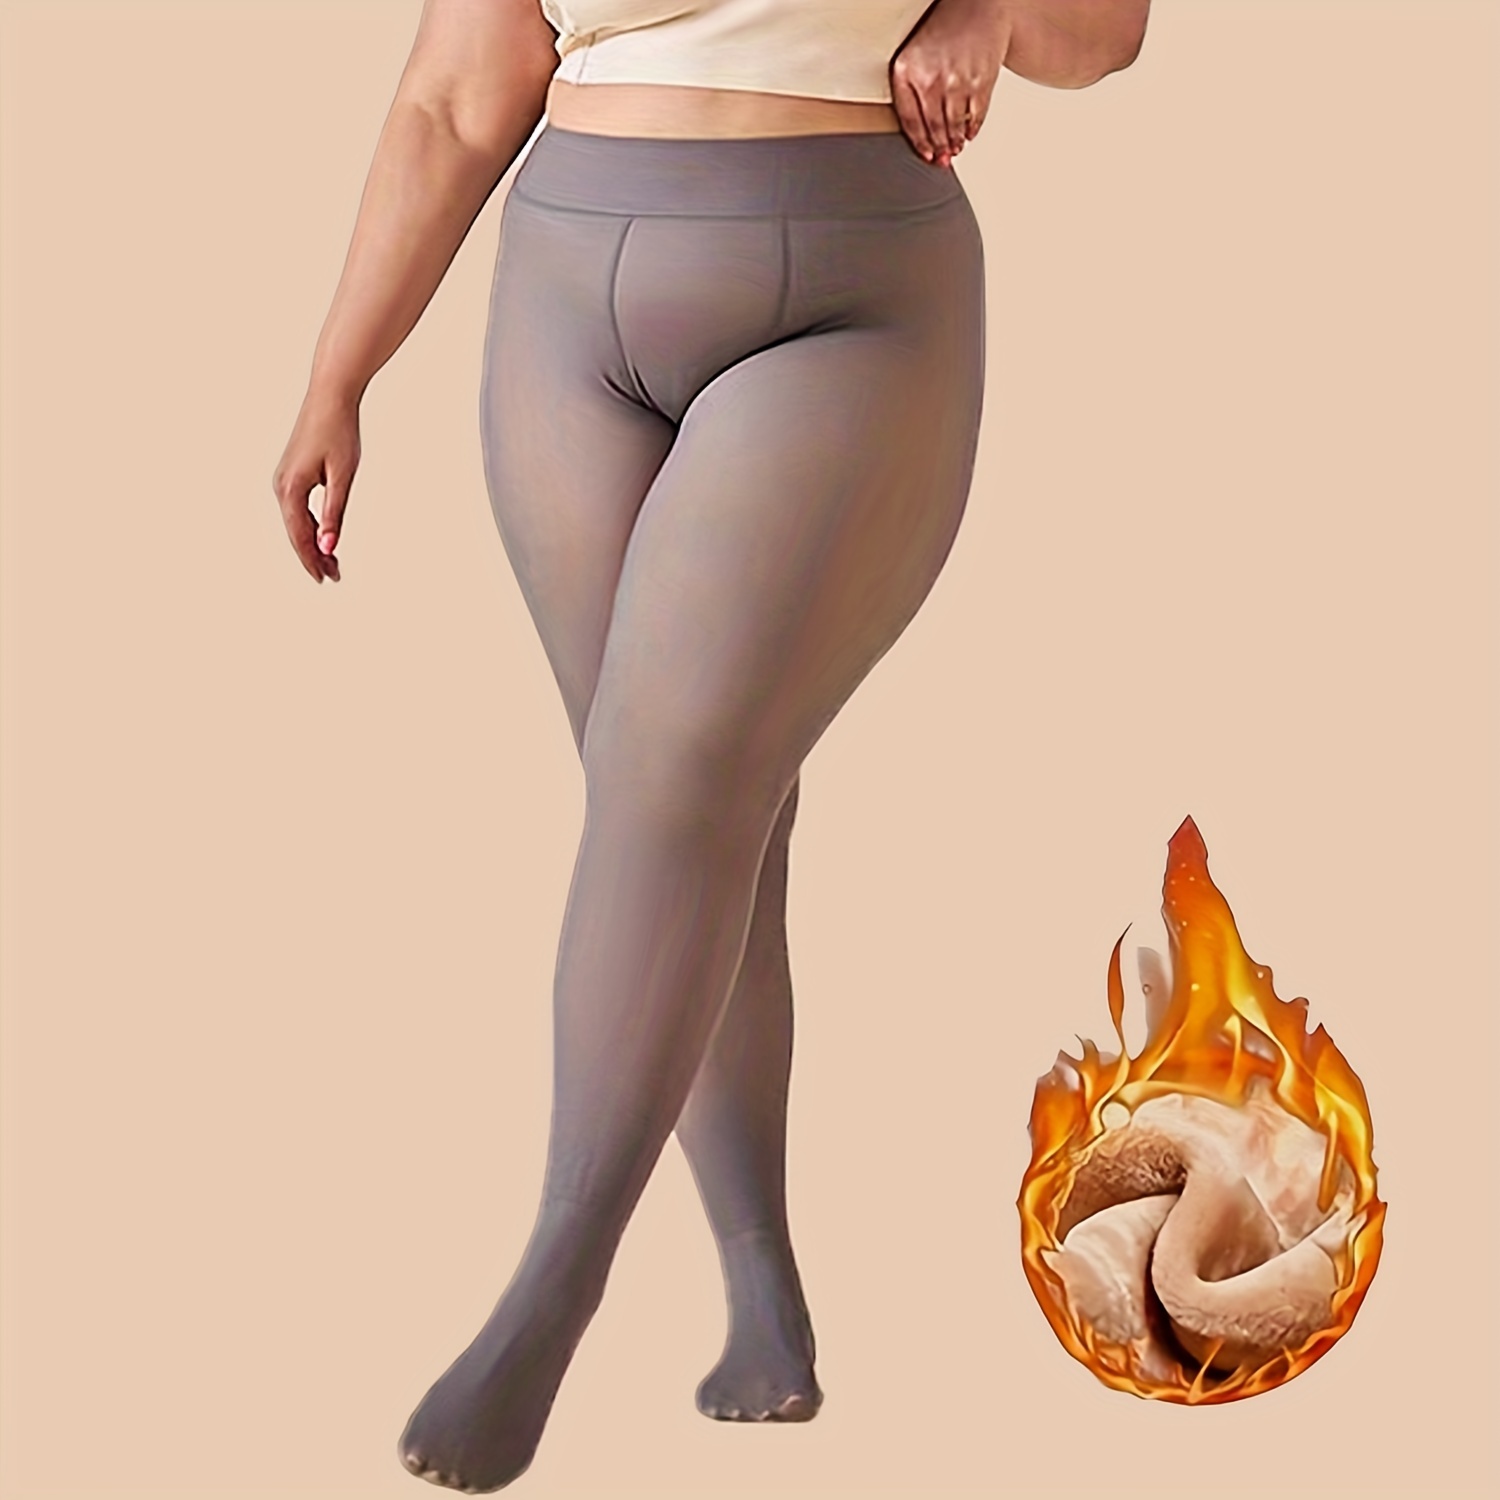 Plus Size Thermal Lined Tights Fake Translucent Pantyhose Winter Warm Fleece